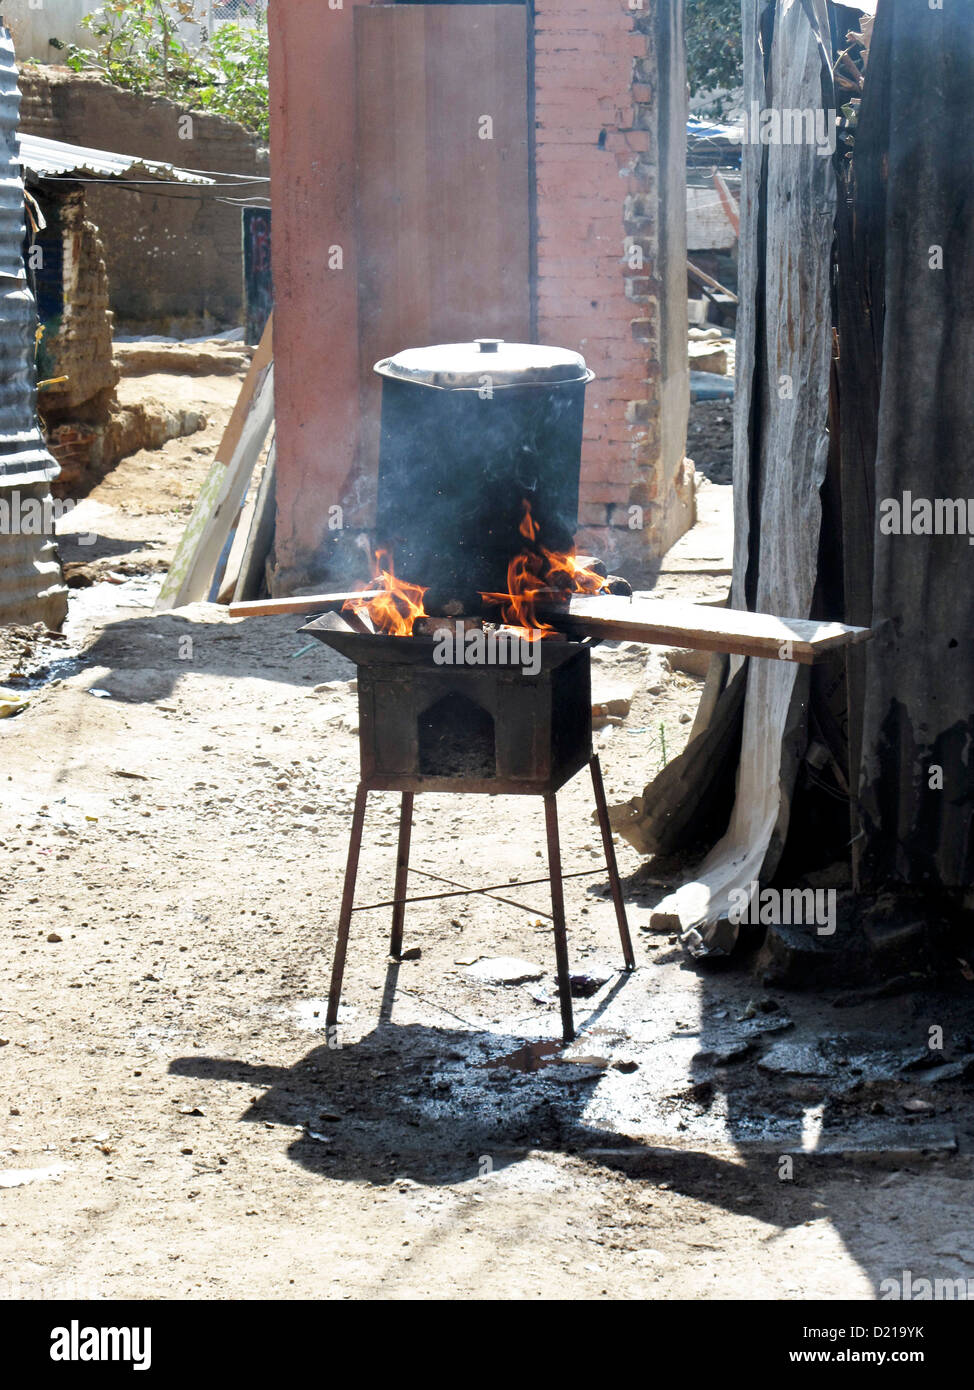 wood fire burns brightly & smoke rises outside from makeshift cooking stove in courtyard of Oaxaca de Juarez building Mexico Stock Photo